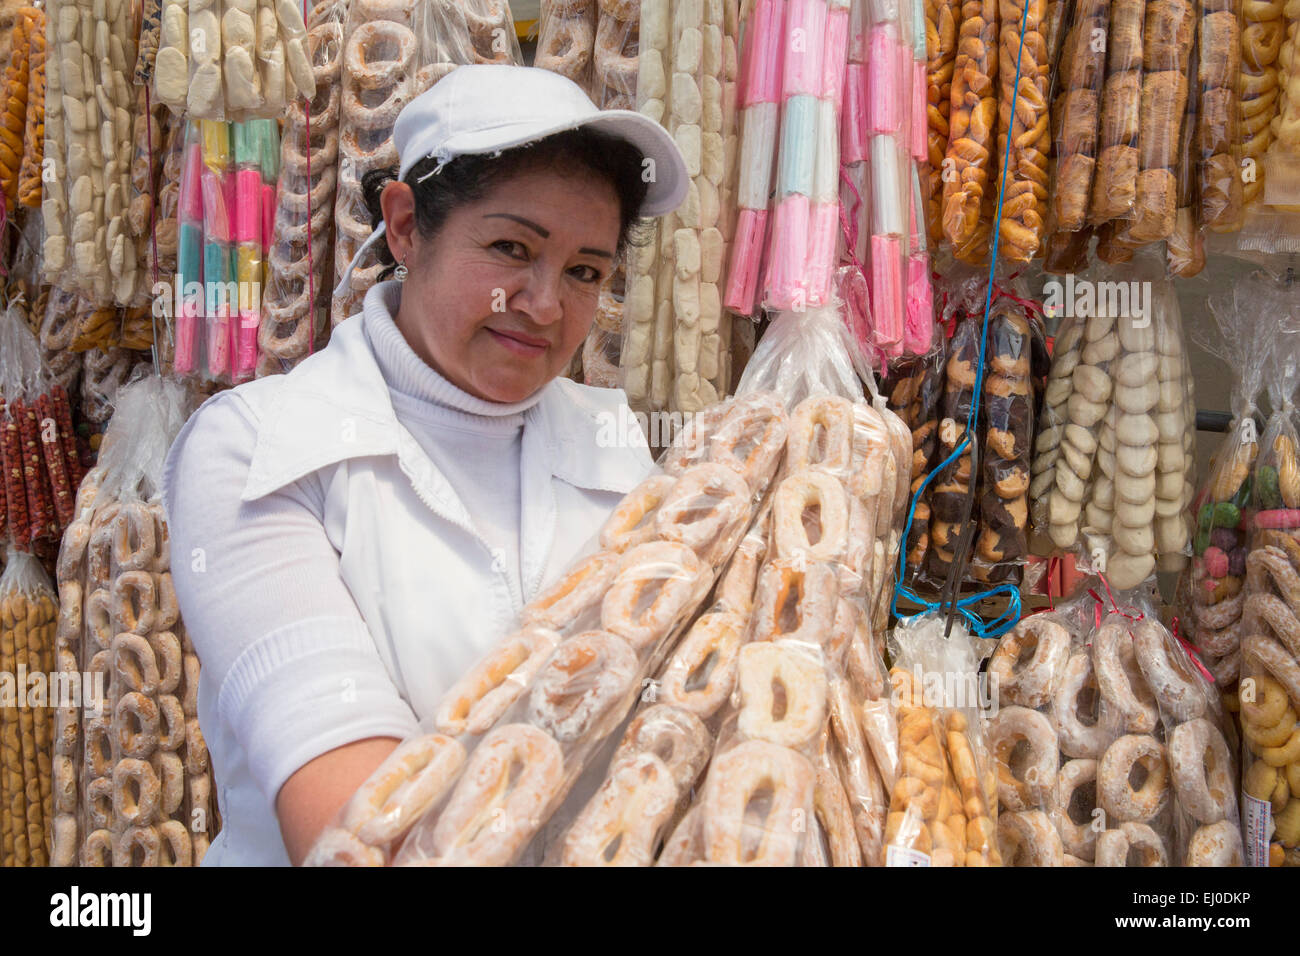 South America, Latin America, Colombia, person, Bogota salesclerk, market, sweets, candy, Stock Photo